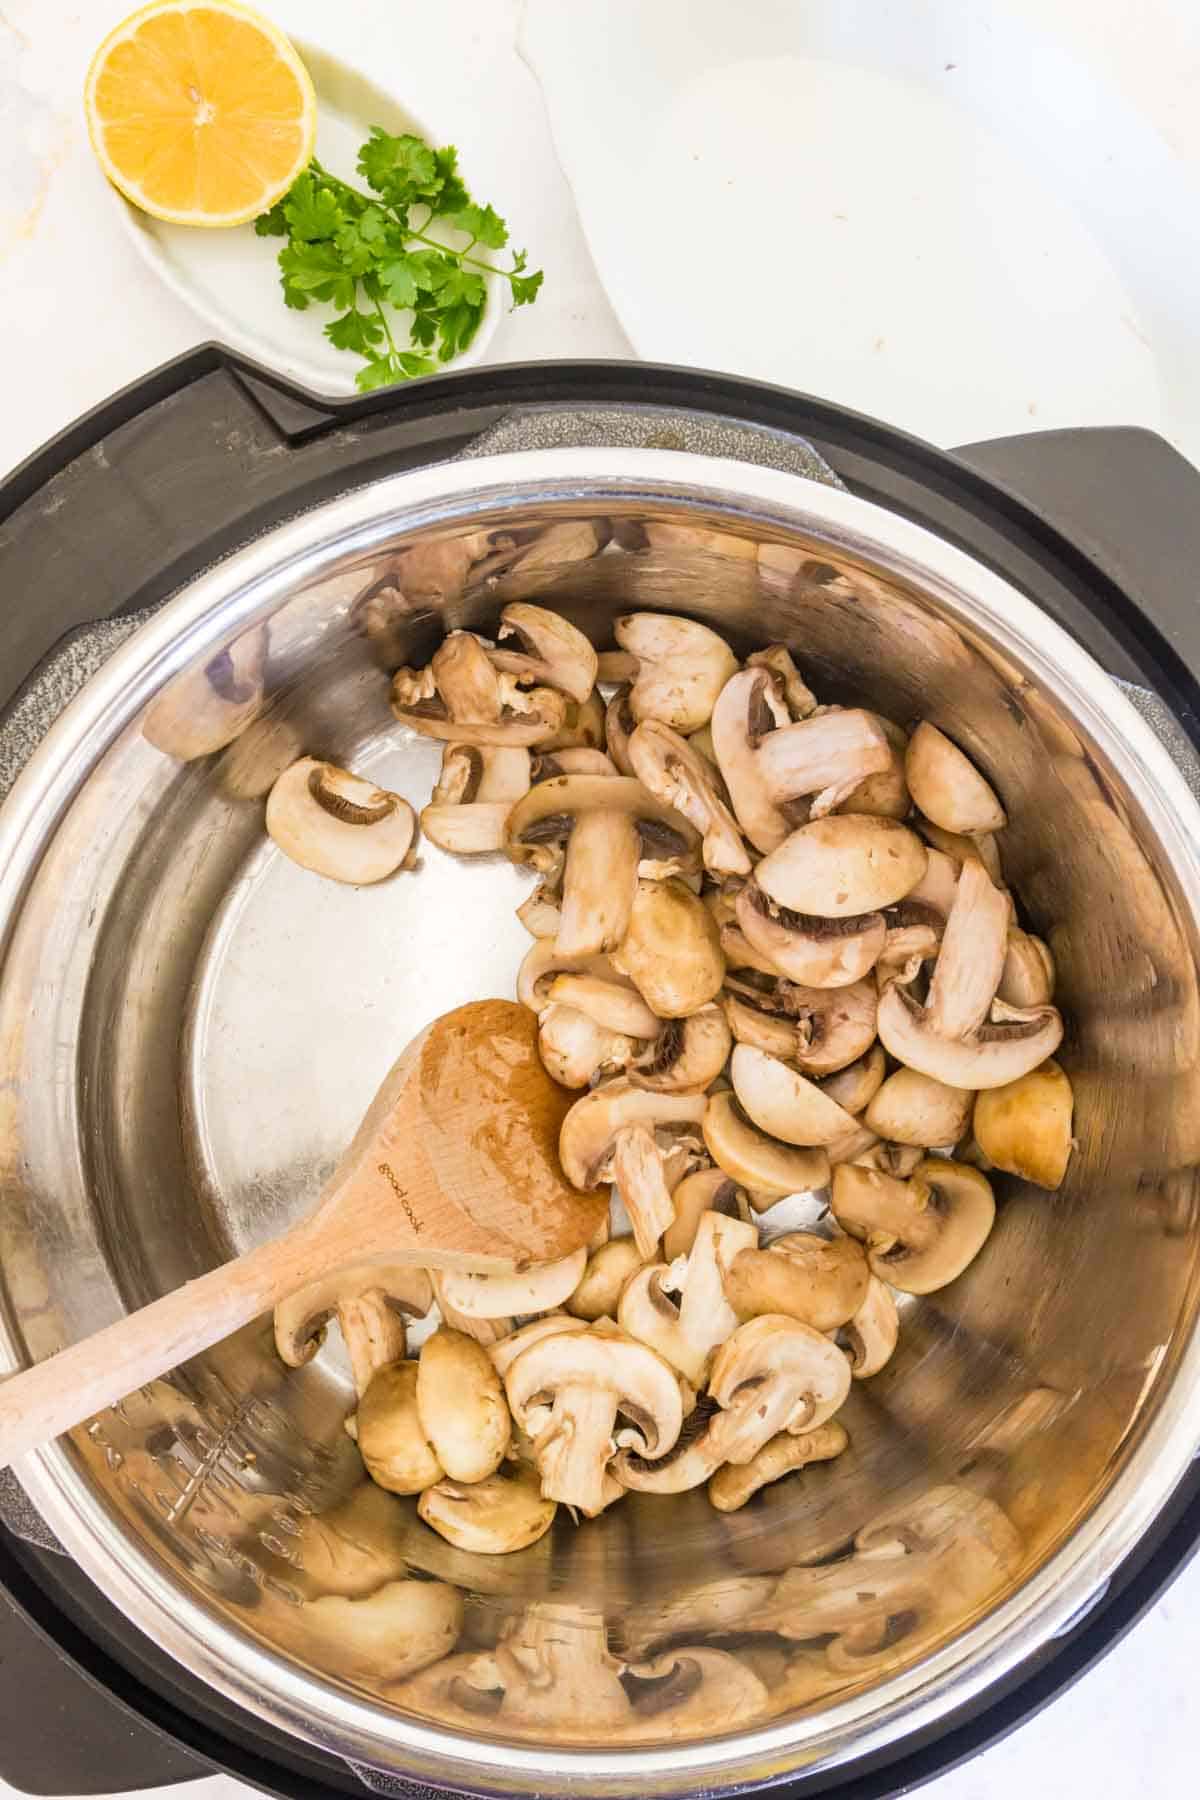 Mushrooms sauteing with butter inside the Instant Pot.